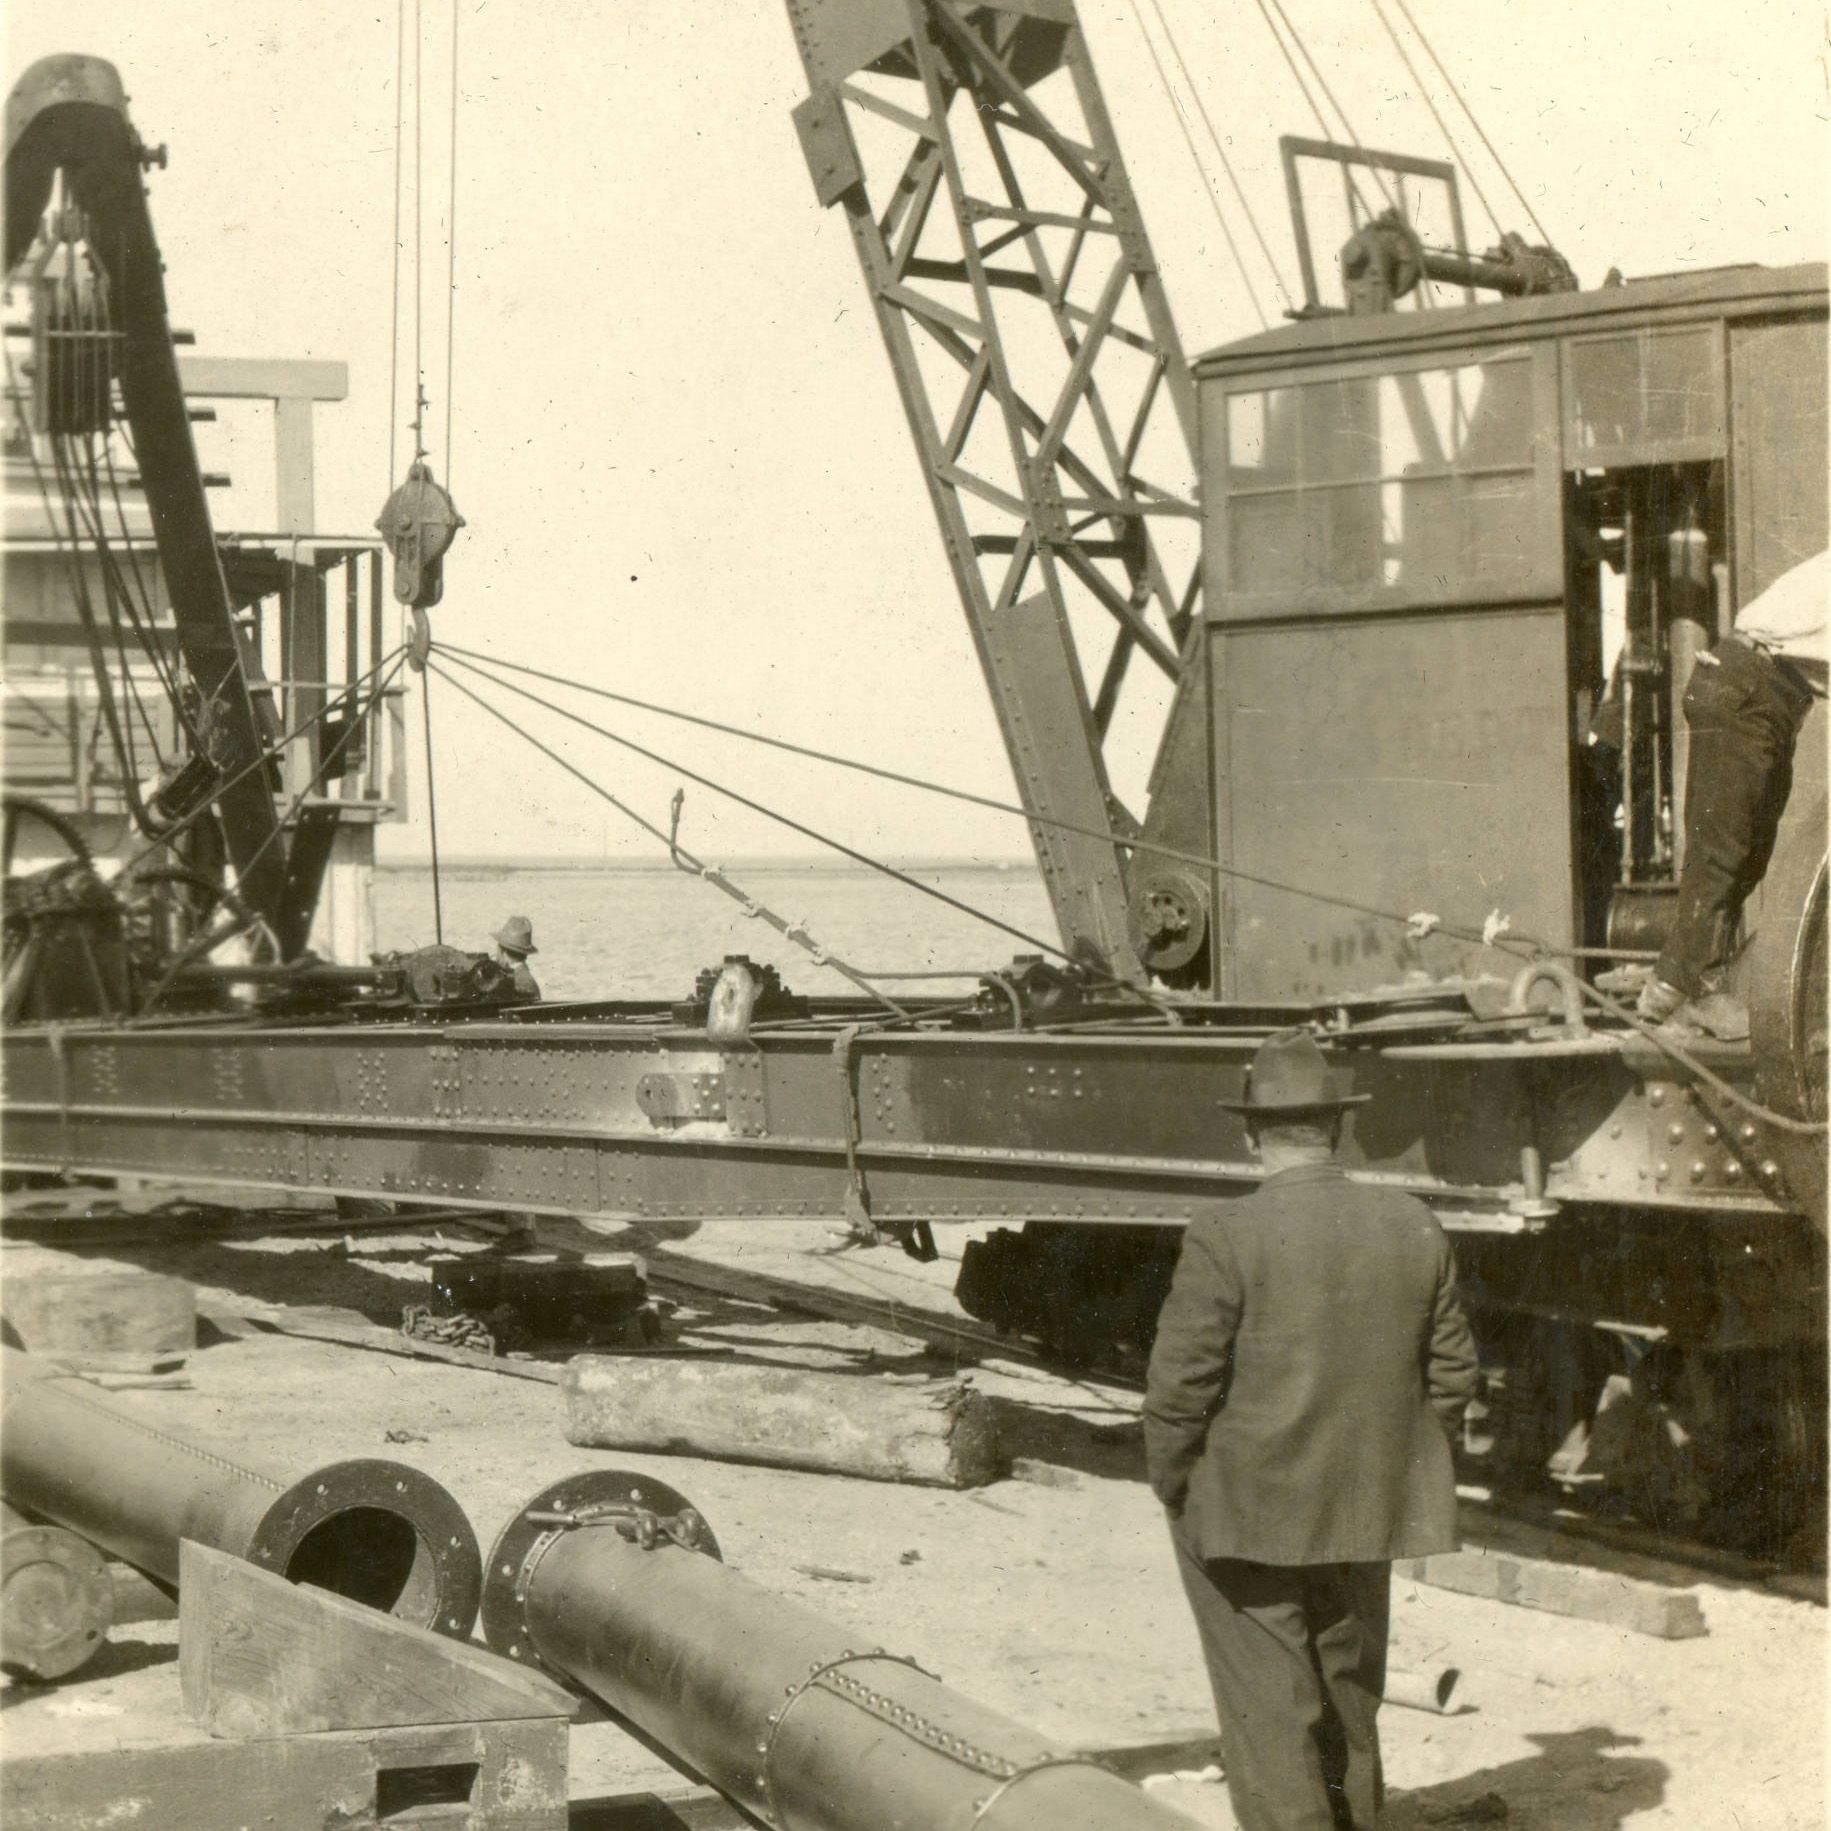 Man on a dock with crane and machinery nearby